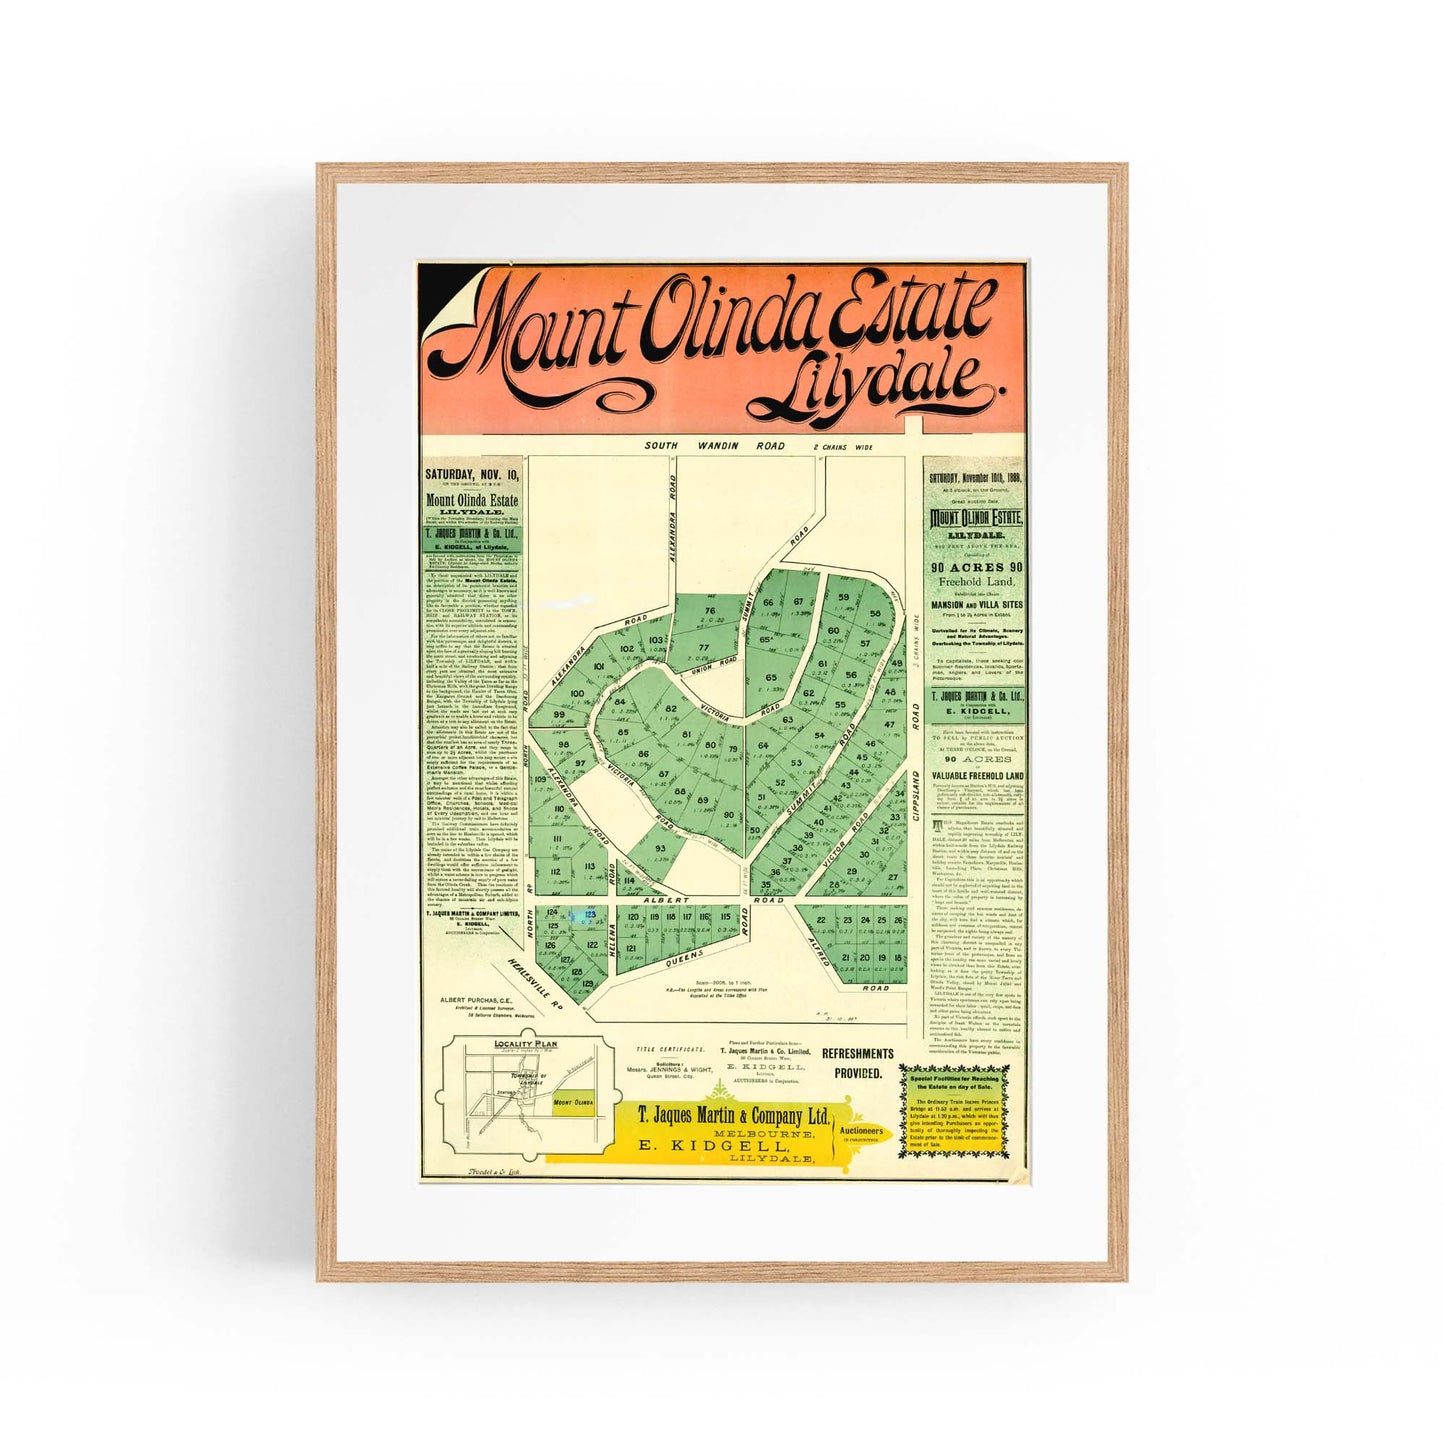 Lilydale Victoria Vintage Real Estate Advert Wall Art #2 - The Affordable Art Company